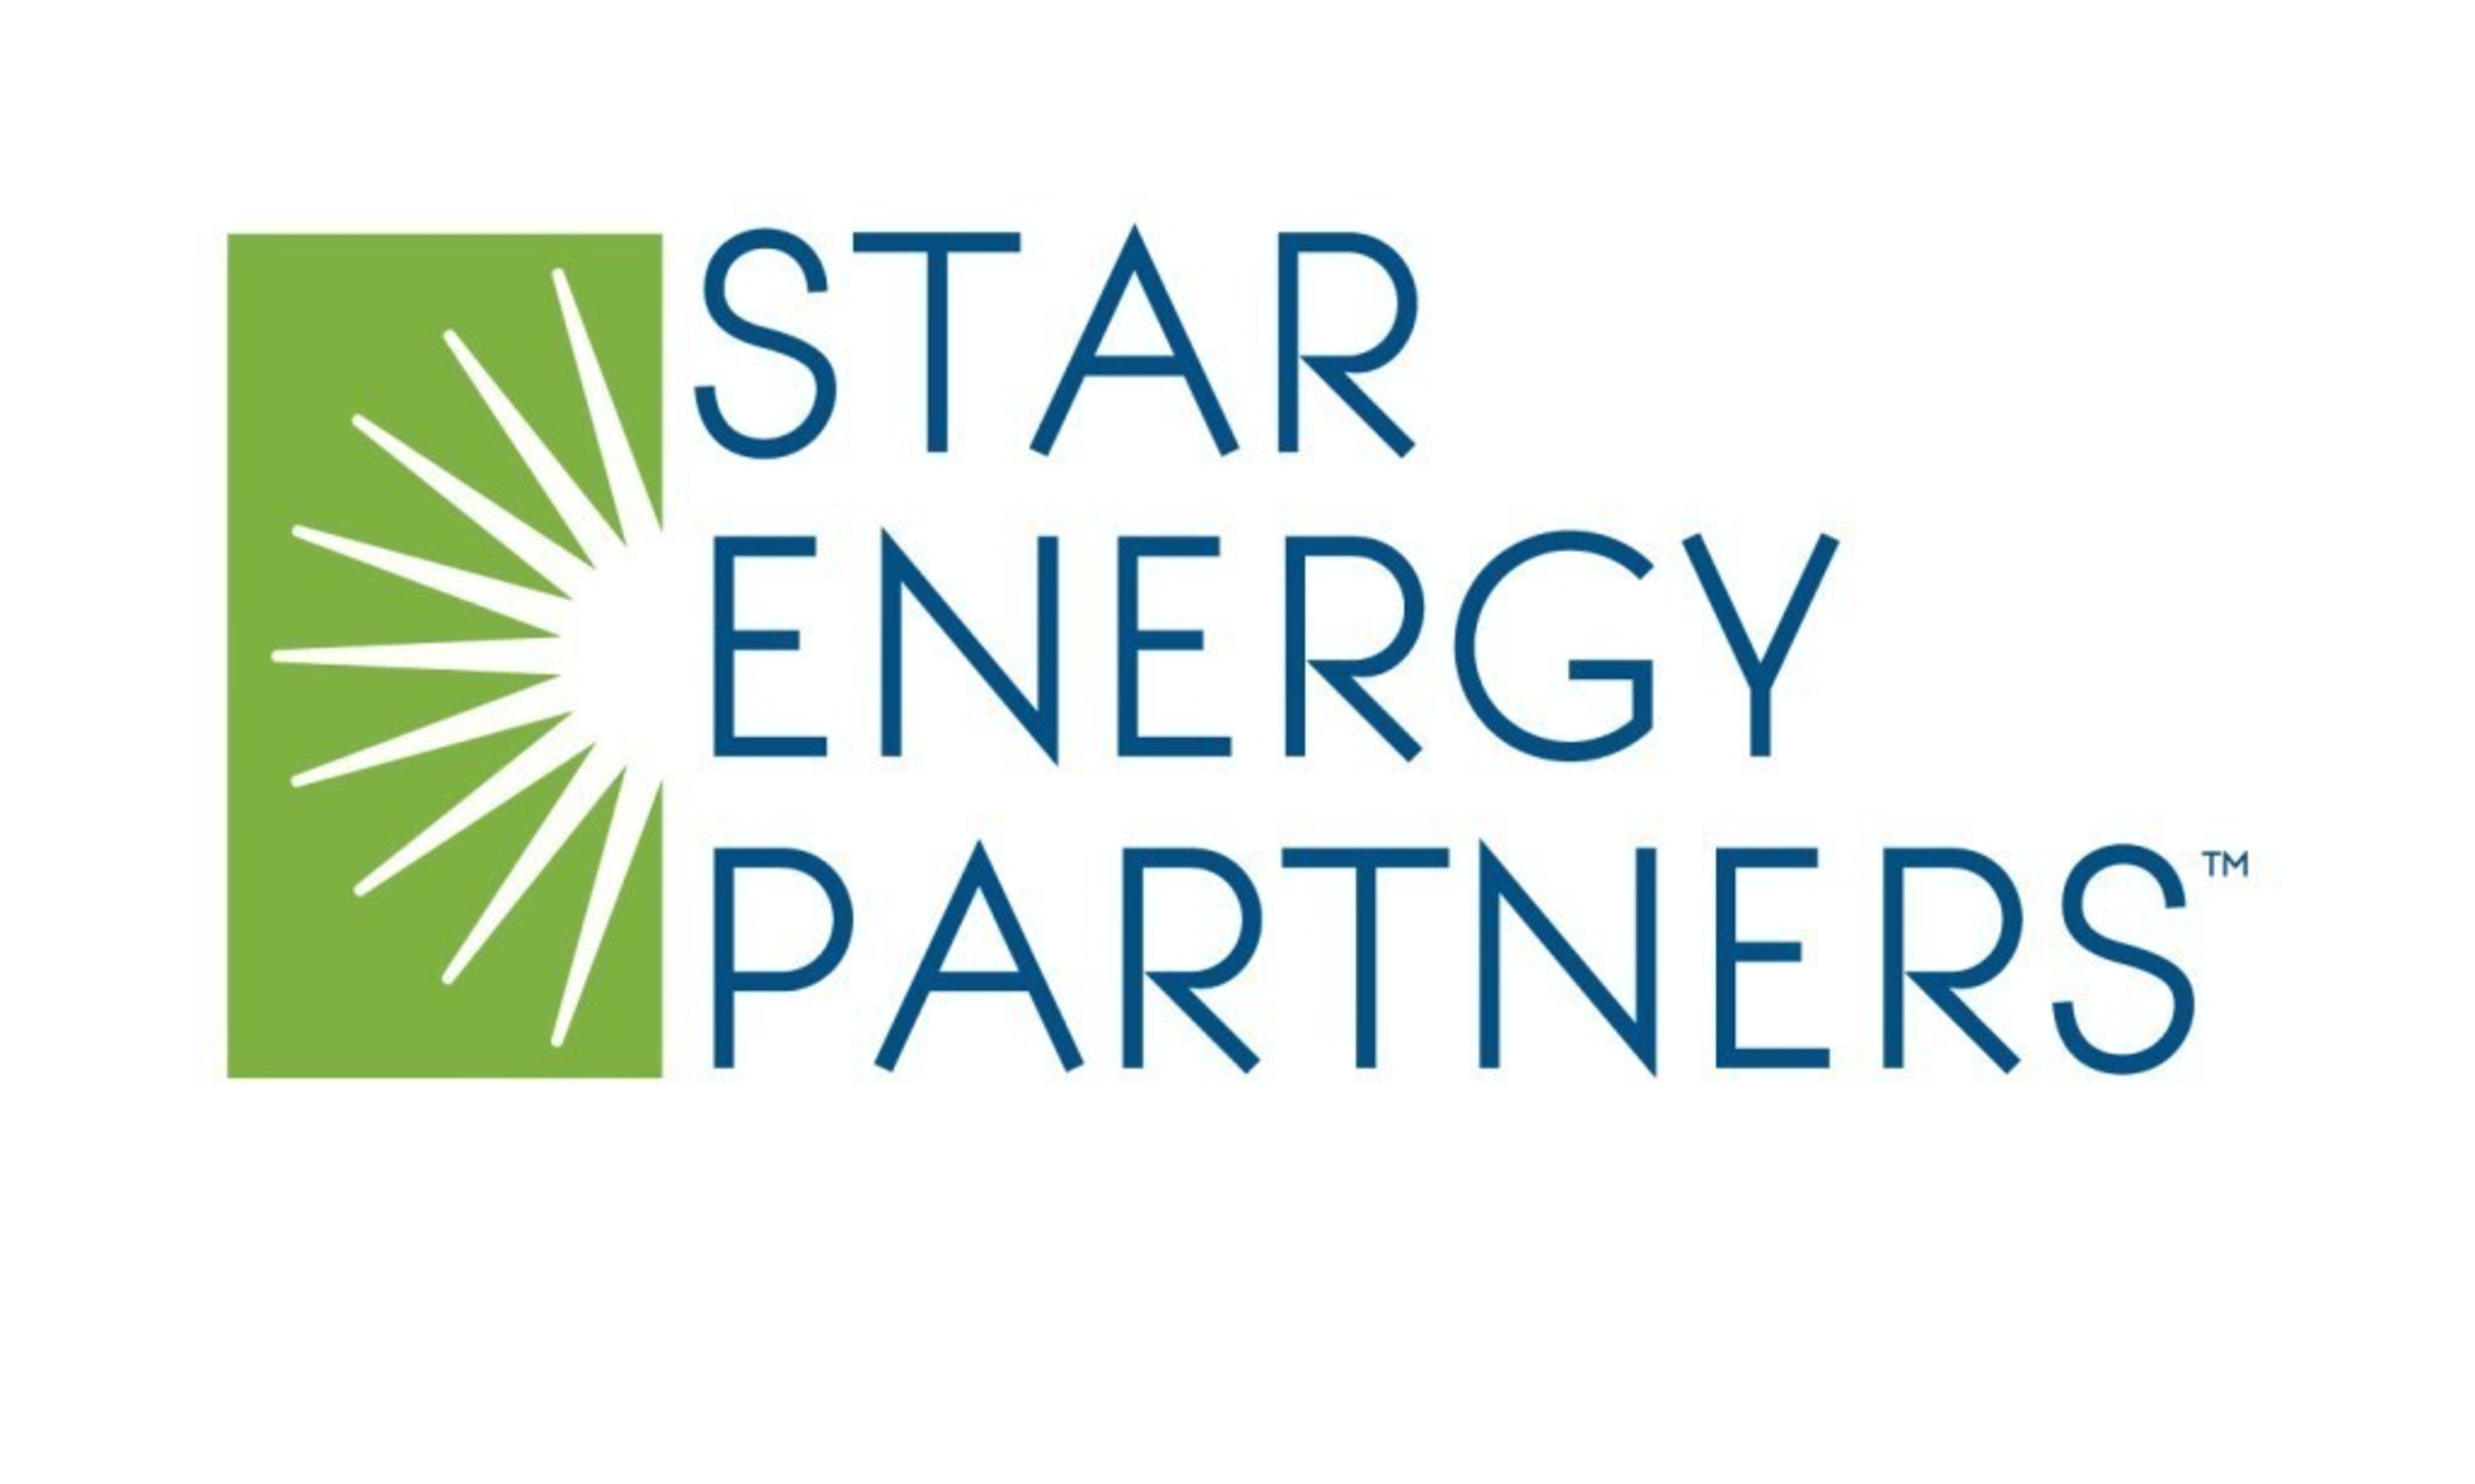 Star Energy Partners has expanded its service area to include New Jersey.